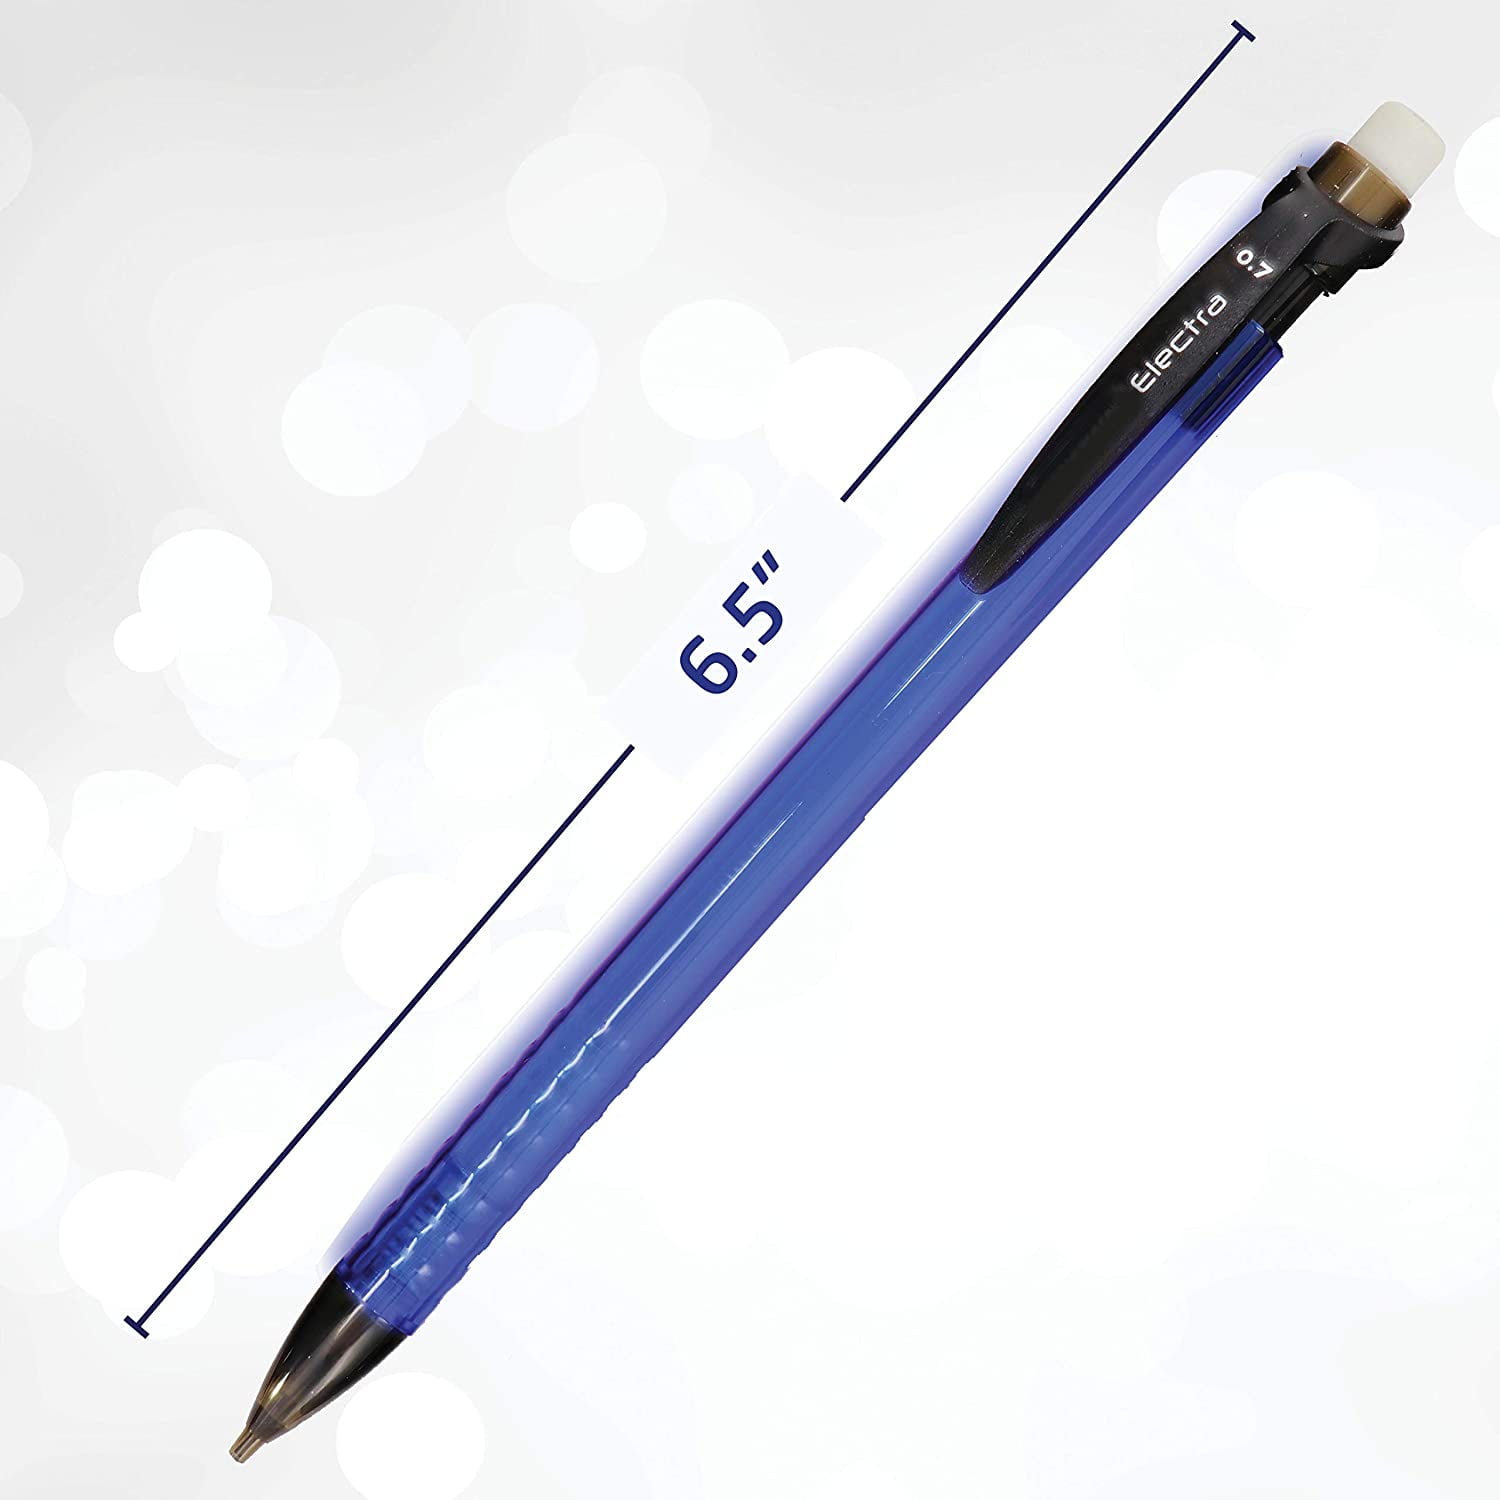 8 Pieces Mechanical Pencil Metal Mechanical Pencil Retractable Automatic  Drafting Pencils Refills For Writing Drawing Signature (Blue, Black,0.7 Mm